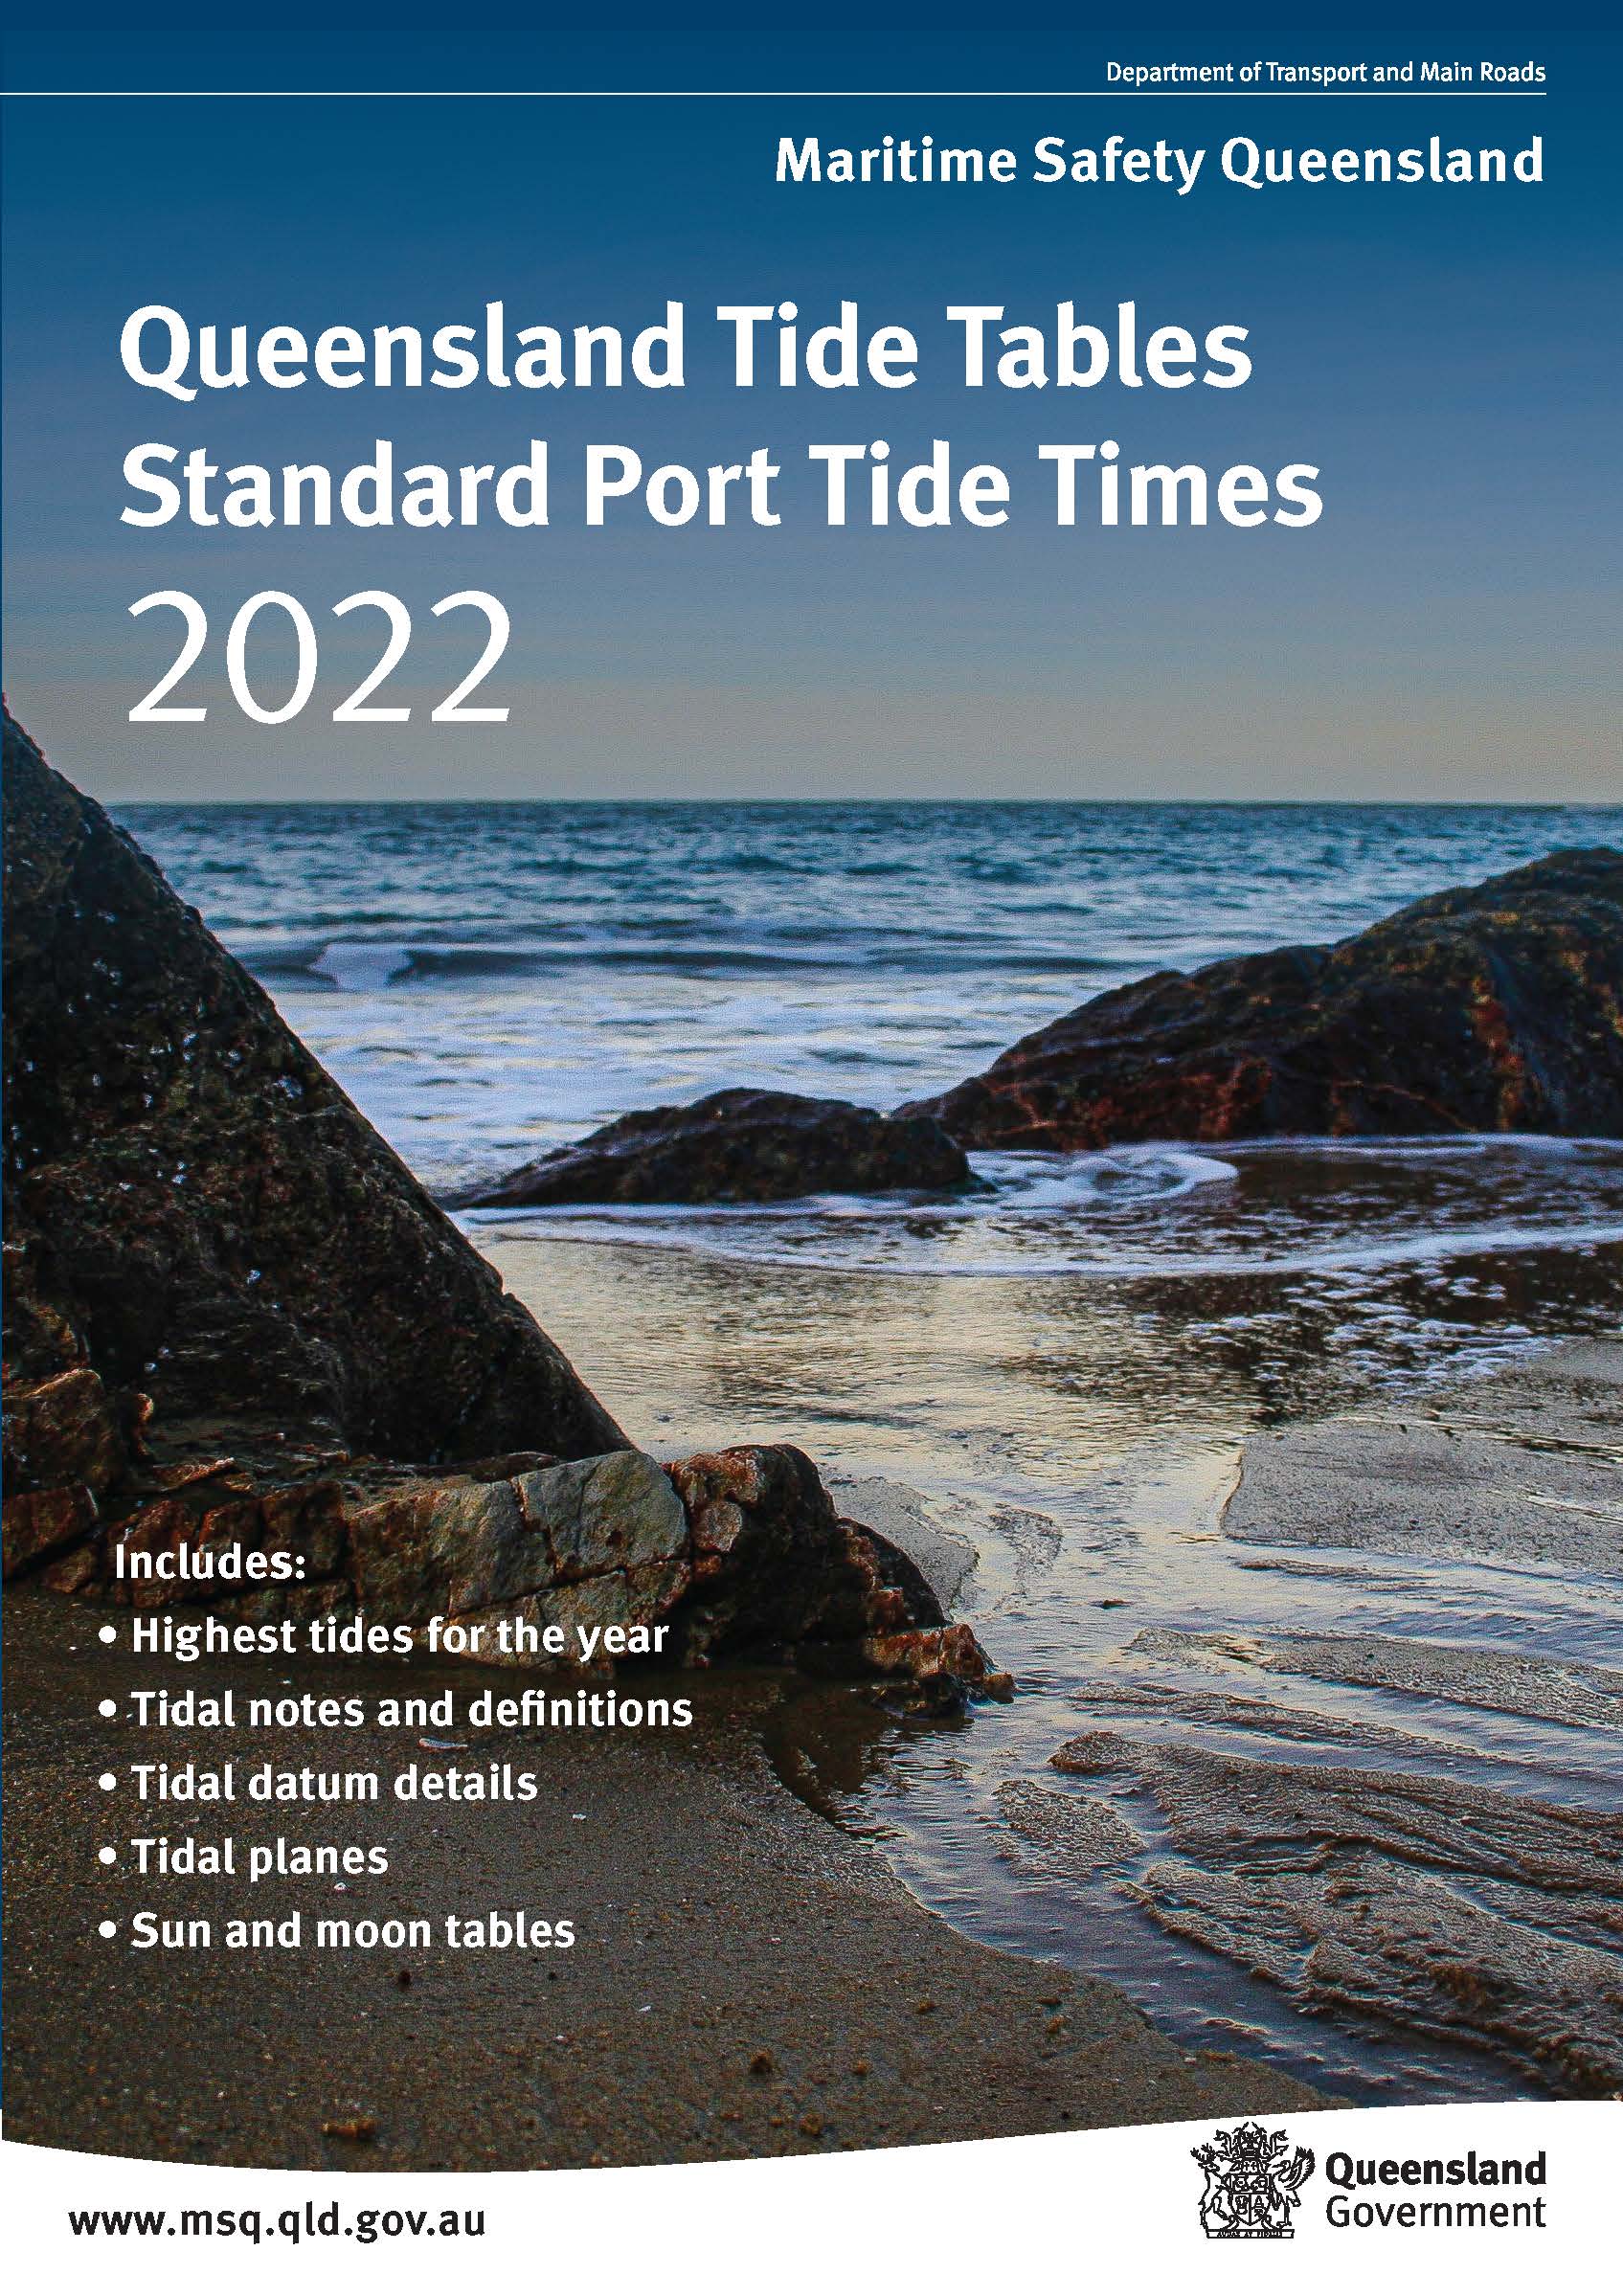 2022 Queensland Tide Tables cover of the shoreline 